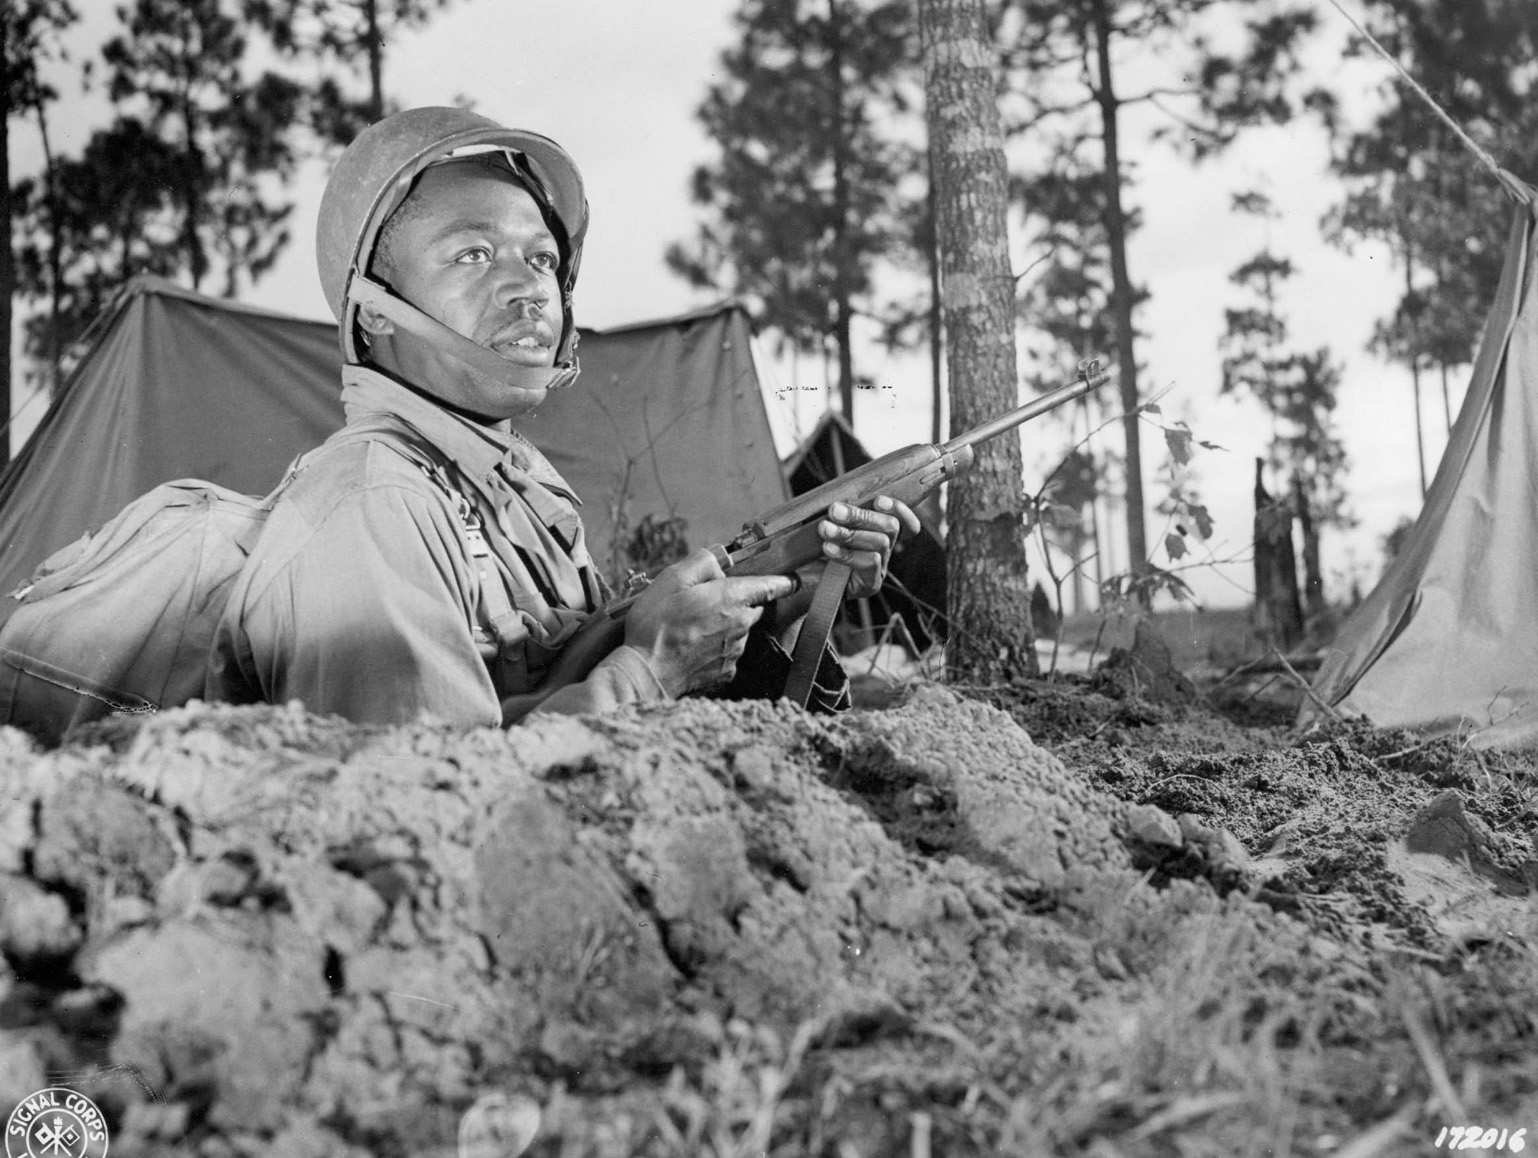 Now outfitted with the modern M-1 helmet and an M-1 carbine, Private Clarence Jones, 594th Field Artillery Battalion, is photographed during the Third Army Louisiana Maneuvers, April 1943.